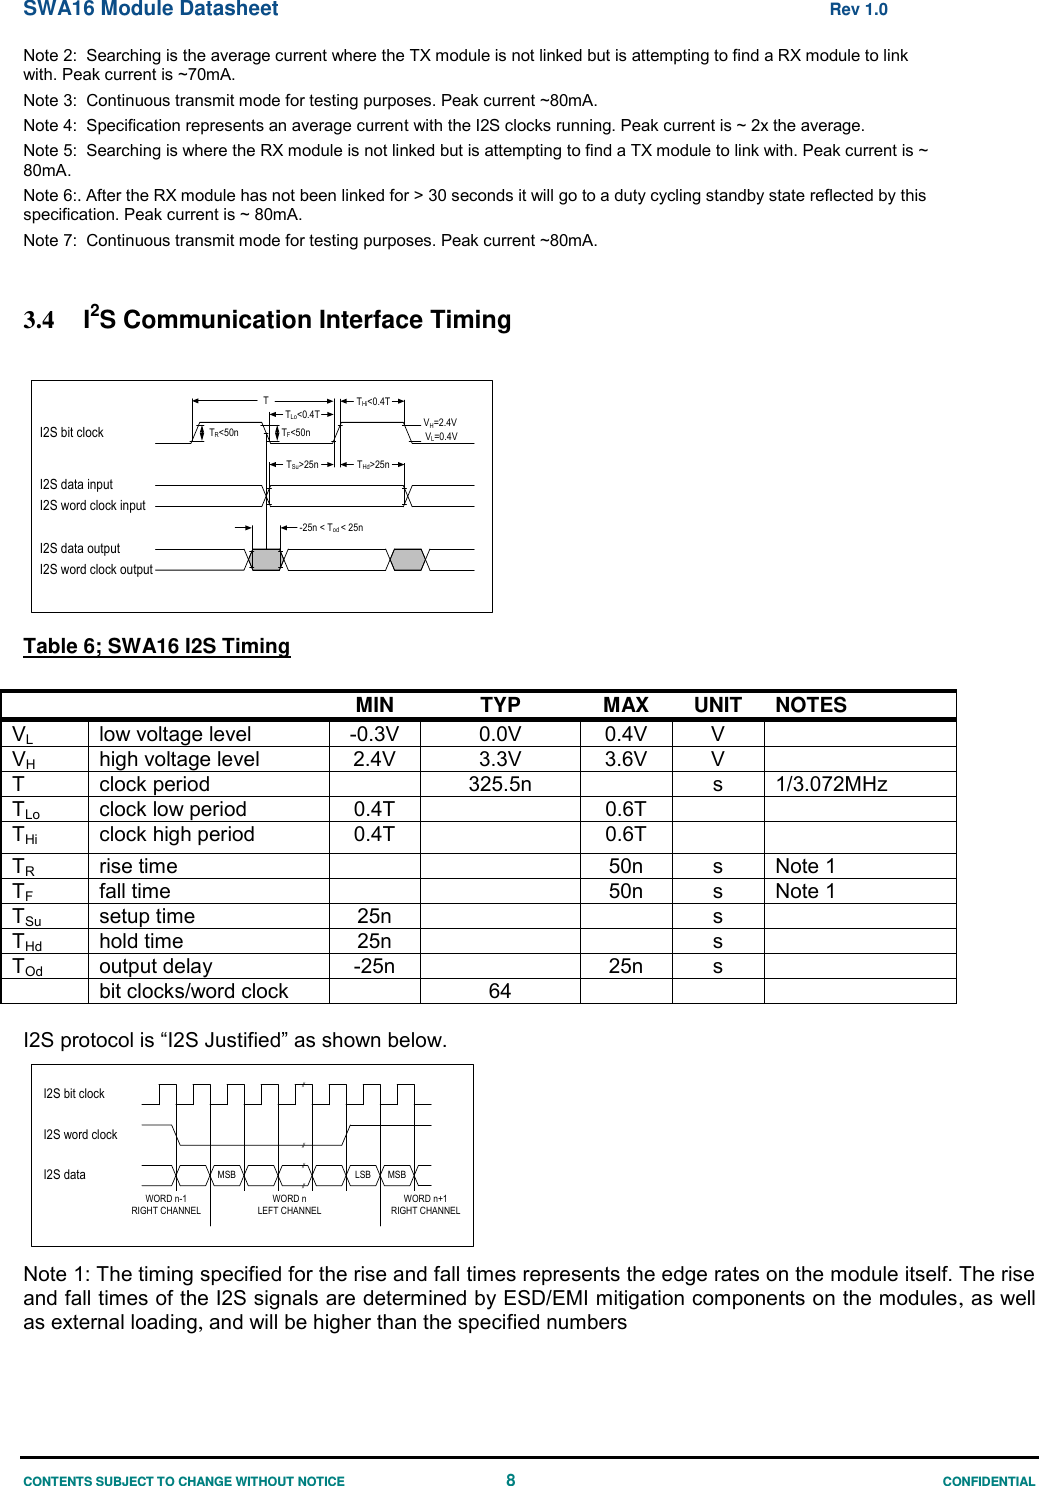 SWA16 Module Datasheet  Rev 1.0 CONTENTS SUBJECT TO CHANGE WITHOUT NOTICE  8 CONFIDENTIAL Note 2:  Searching is the average current where the TX module is not linked but is attempting to find a RX module to link with. Peak current is ~70mA. Note 3:  Continuous transmit mode for testing purposes. Peak current ~80mA. Note 4:  Specification represents an average current with the I2S clocks running. Peak current is ~ 2x the average. Note 5:  Searching is where the RX module is not linked but is attempting to find a TX module to link with. Peak current is ~ 80mA. Note 6:. After the RX module has not been linked for &gt; 30 seconds it will go to a duty cycling standby state reflected by this specification. Peak current is ~ 80mA. Note 7:  Continuous transmit mode for testing purposes. Peak current ~80mA.  3.4  I2S Communication Interface Timing  I2S bit clockTTHi&lt;0.4TTLo&lt;0.4T VH=2.4VVL=0.4VI2S data inputI2S word clock inputTSu&gt;25n THd&gt;25nI2S data outputI2S word clock output-25n &lt; Tod &lt; 25nTR&lt;50n TF&lt;50n Table 6; SWA16 I2S Timing    MIN TYP MAX UNIT NOTES VL  low voltage level -0.3V 0.0V 0.4V V  VH  high voltage level 2.4V 3.3V 3.6V V  T  clock period  325.5n  s 1/3.072MHz TLo  clock low period 0.4T  0.6T   THi  clock high period 0.4T  0.6T   TR  rise time   50n s Note 1 TF  fall time   50n s Note 1 TSu  setup time 25n   s  THd  hold time 25n   s  TOd  output delay -25n  25n s   bit clocks/word clock  64     I2S protocol is “I2S Justified” as shown below. MSB LSB MSBWORD n-1RIGHT CHANNELWORD nLEFT CHANNELWORD n+1RIGHT CHANNELI2S bit clockI2S dataI2S word clock Note 1: The timing specified for the rise and fall times represents the edge rates on the module itself. The rise and fall times of the I2S signals are determined by ESD/EMI mitigation components on the modules, as well as external loading, and will be higher than the specified numbers 